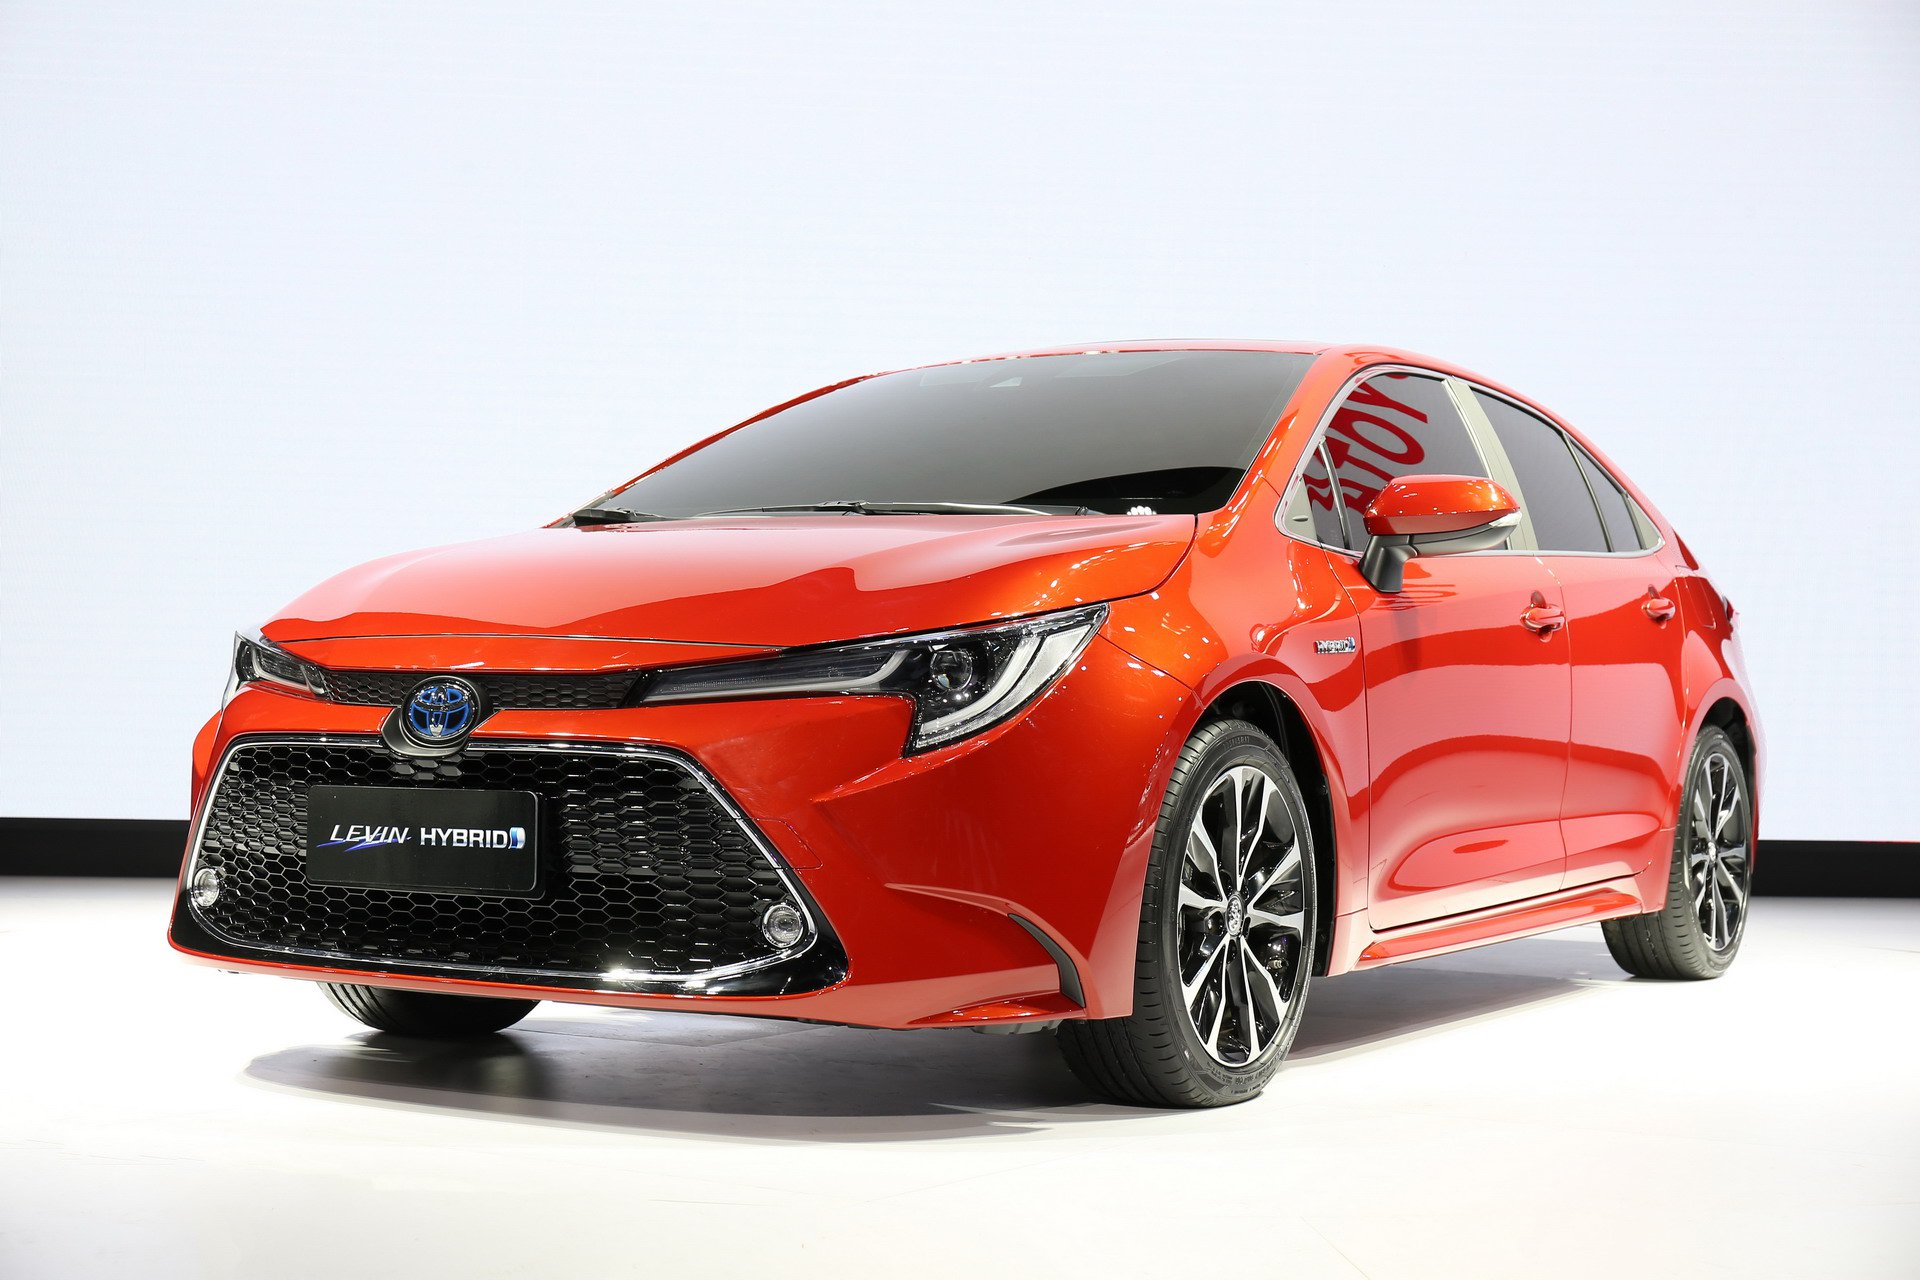 33 HQ Images 2020 Toyota Corolla Sport Edition : 2021 Toyota Corolla Apex Edition: When You Want Sleek ...